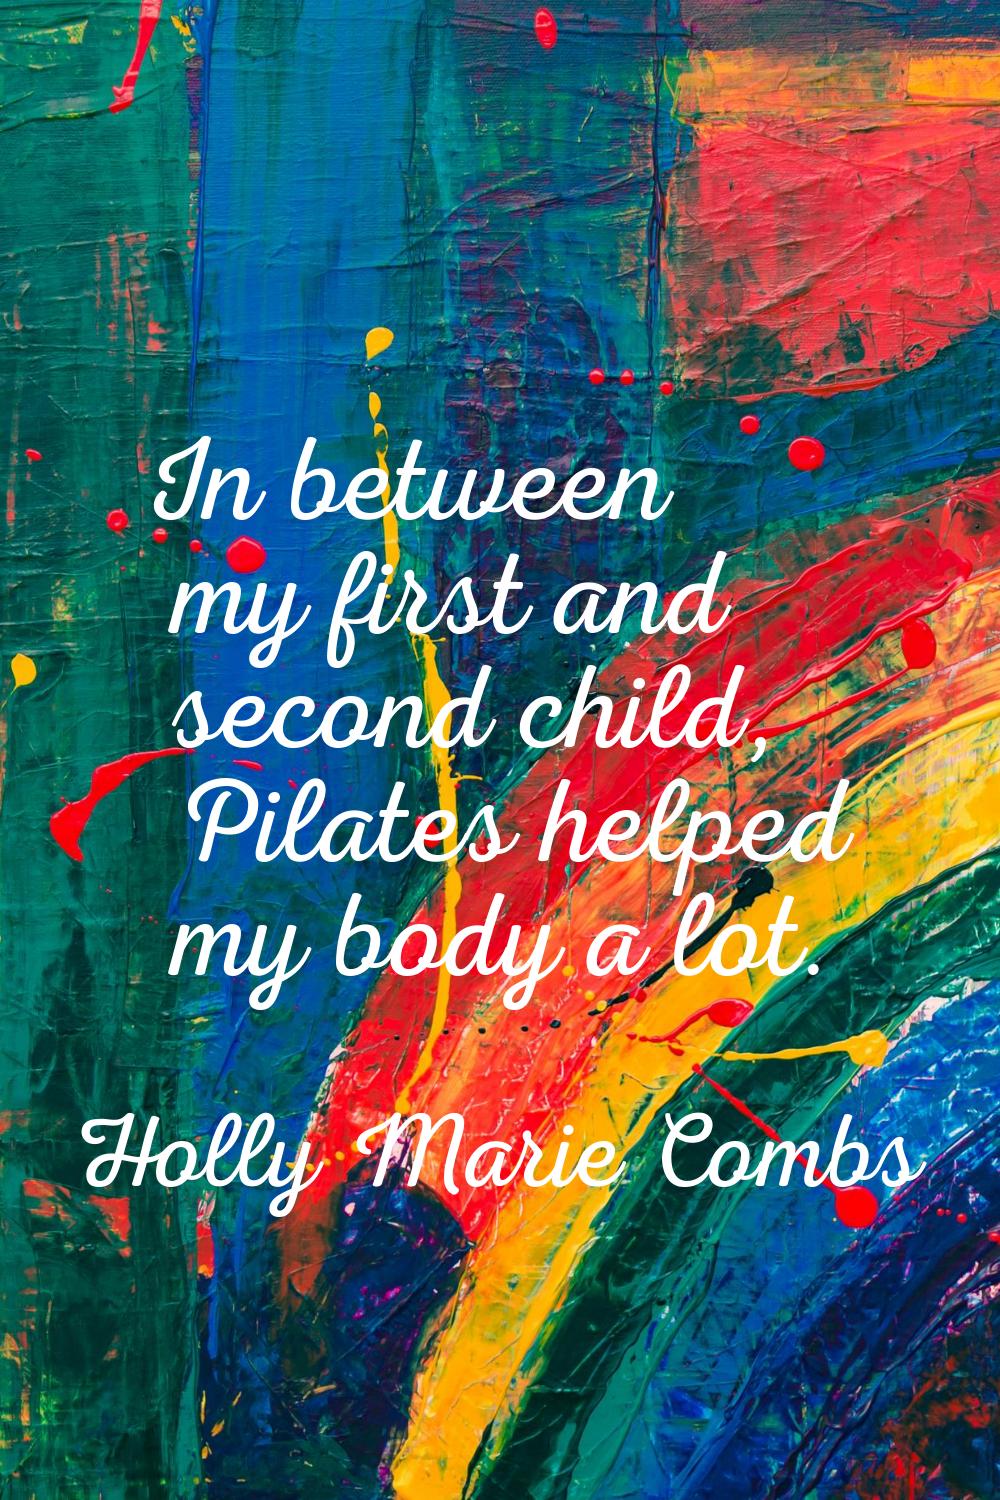 In between my first and second child, Pilates helped my body a lot.